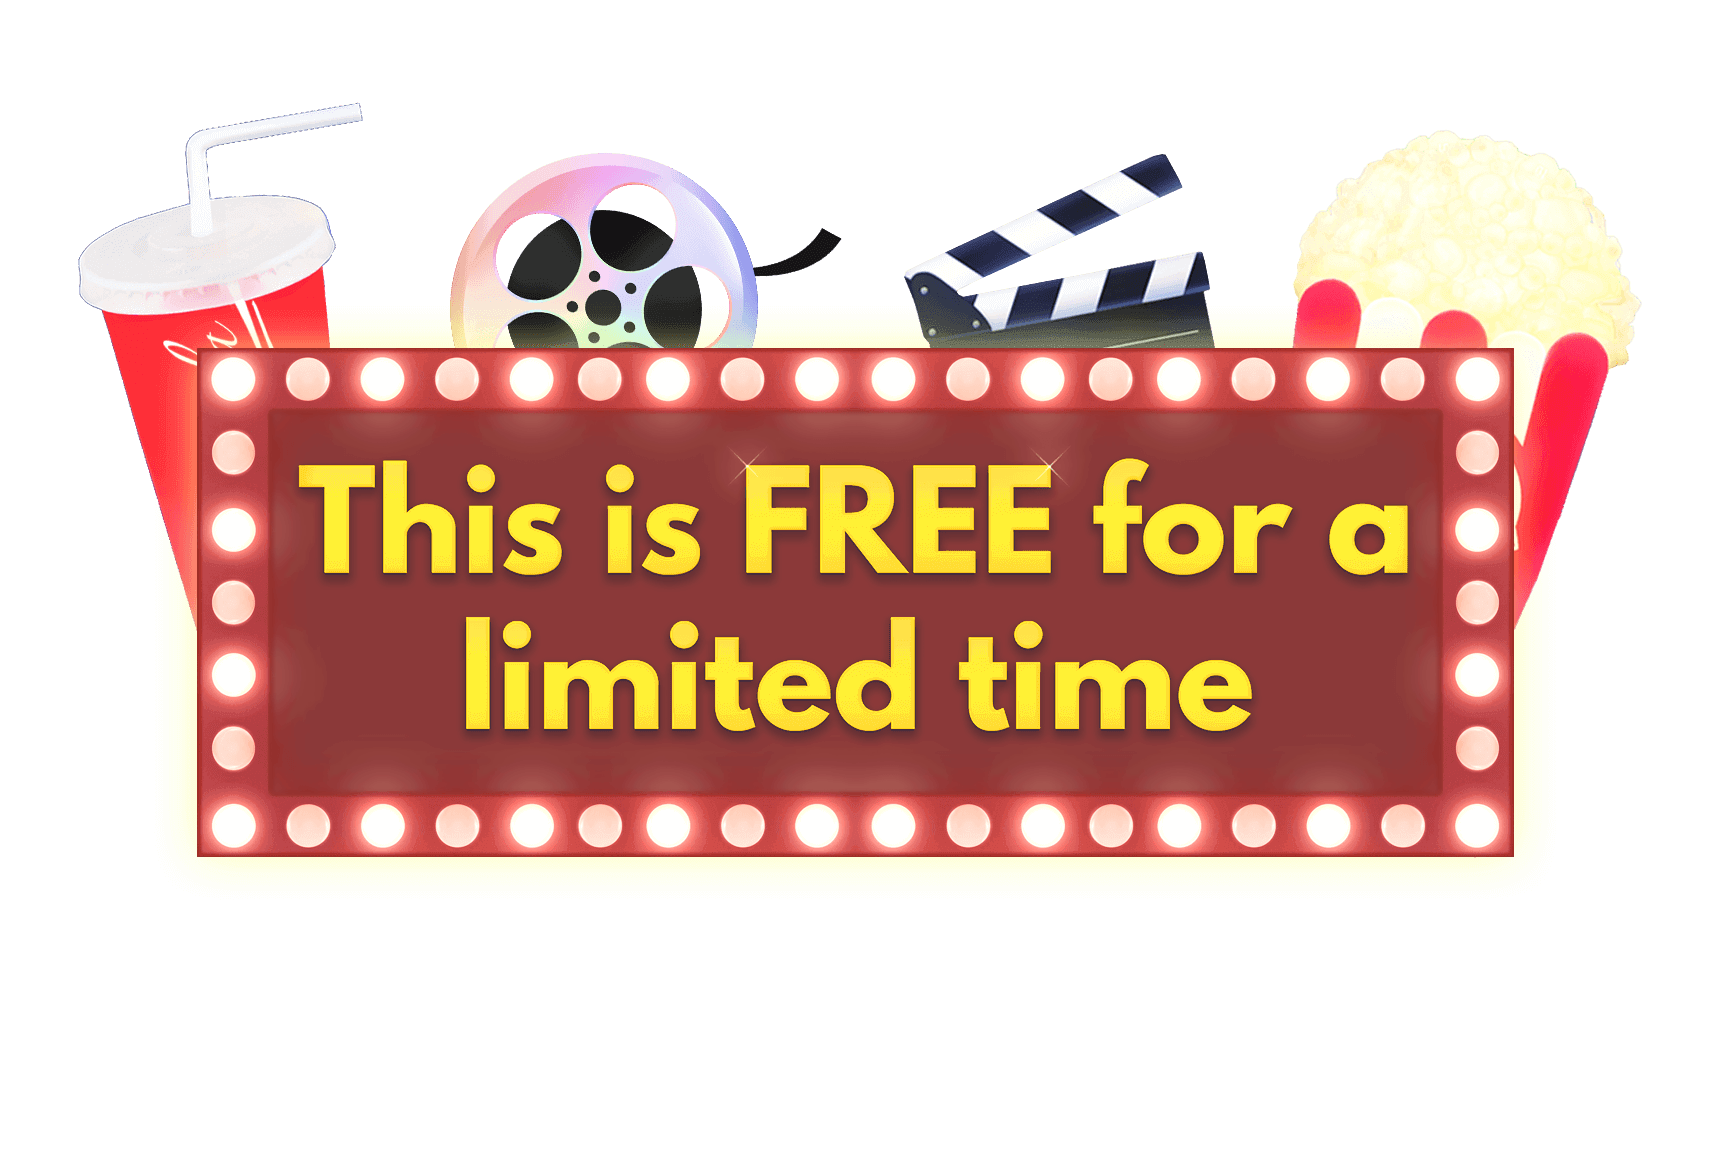 This script is FREE for a limited time!